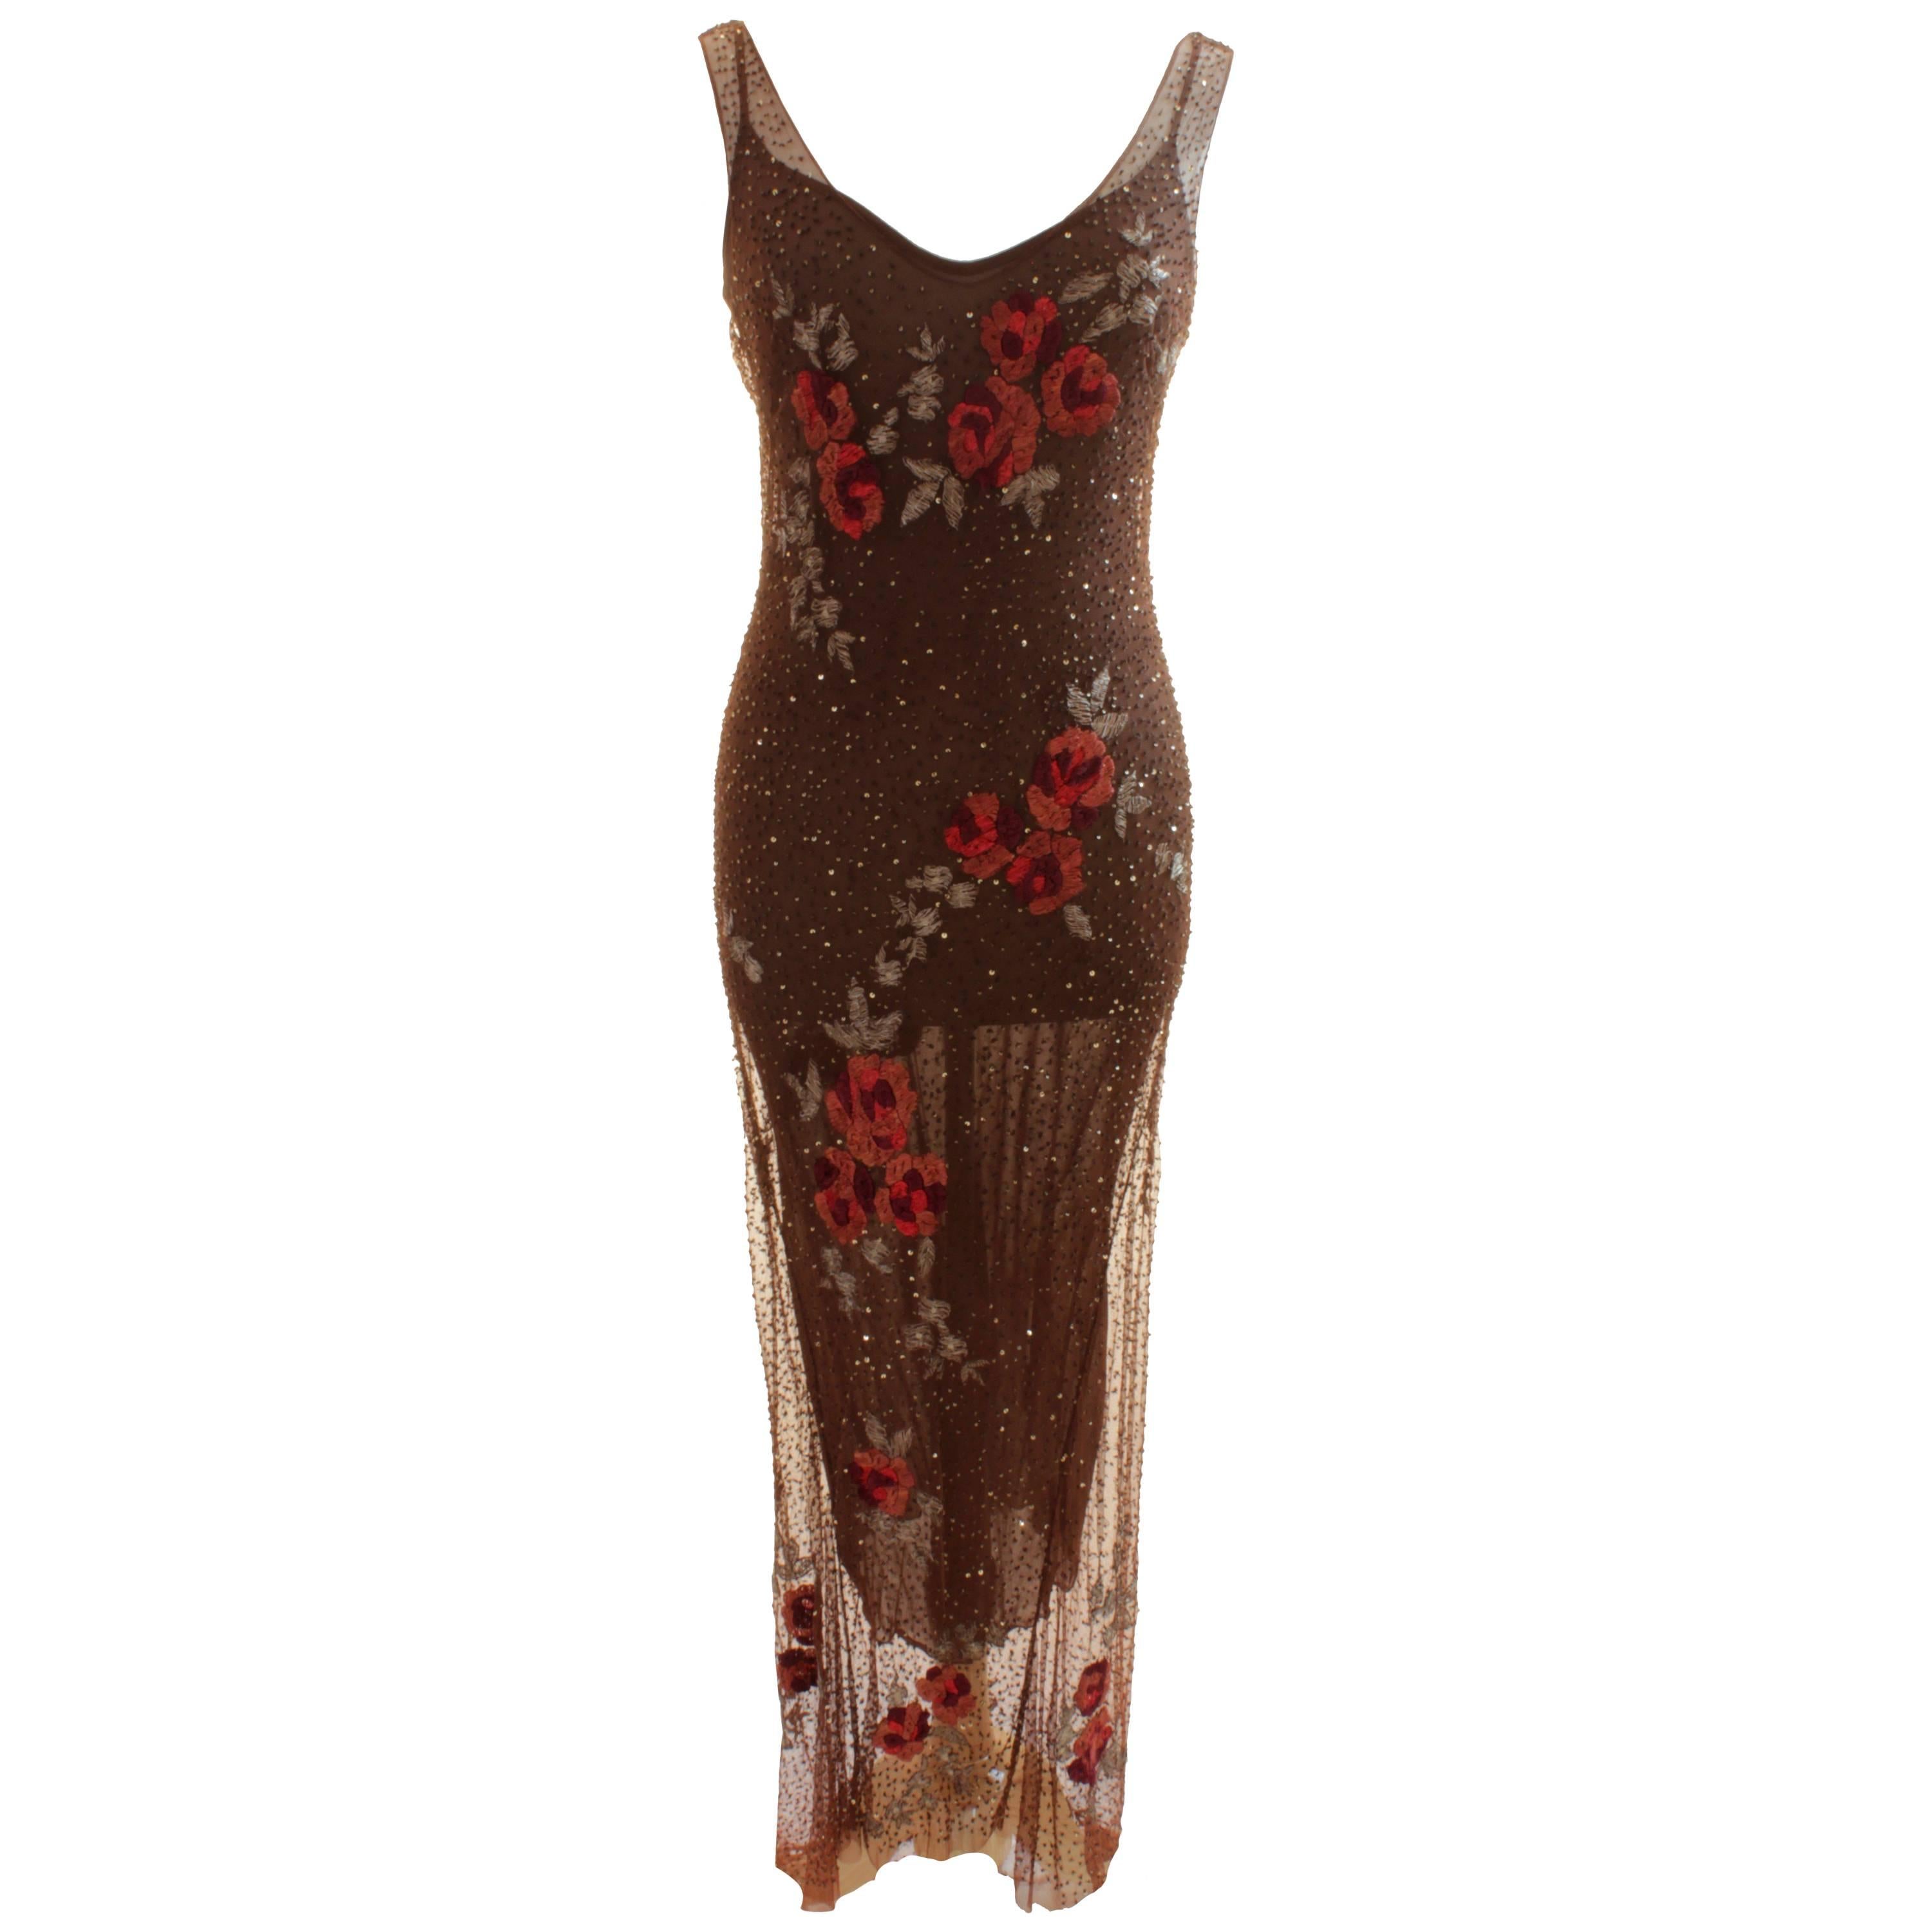 Brown Slip Dress with Sheer Overlay Floral Motif Embroidery Sz M Made in Italy 